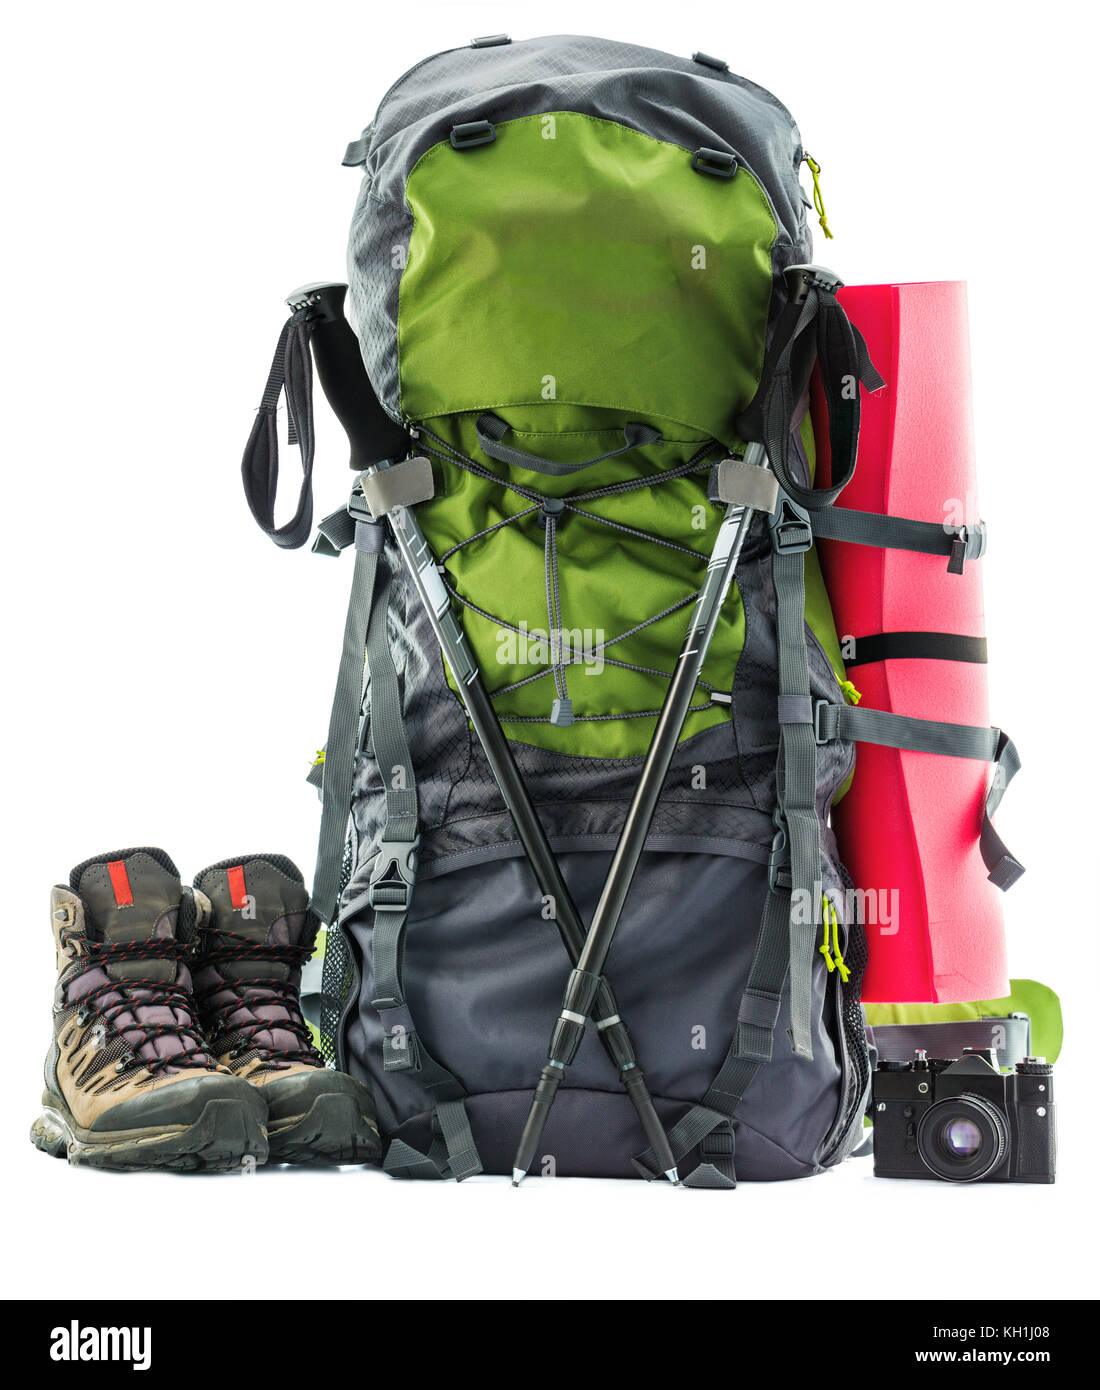 Large green touristic backpack and hiking equipment, rucksack, boots and slipping pad isolated on white Stock Photo